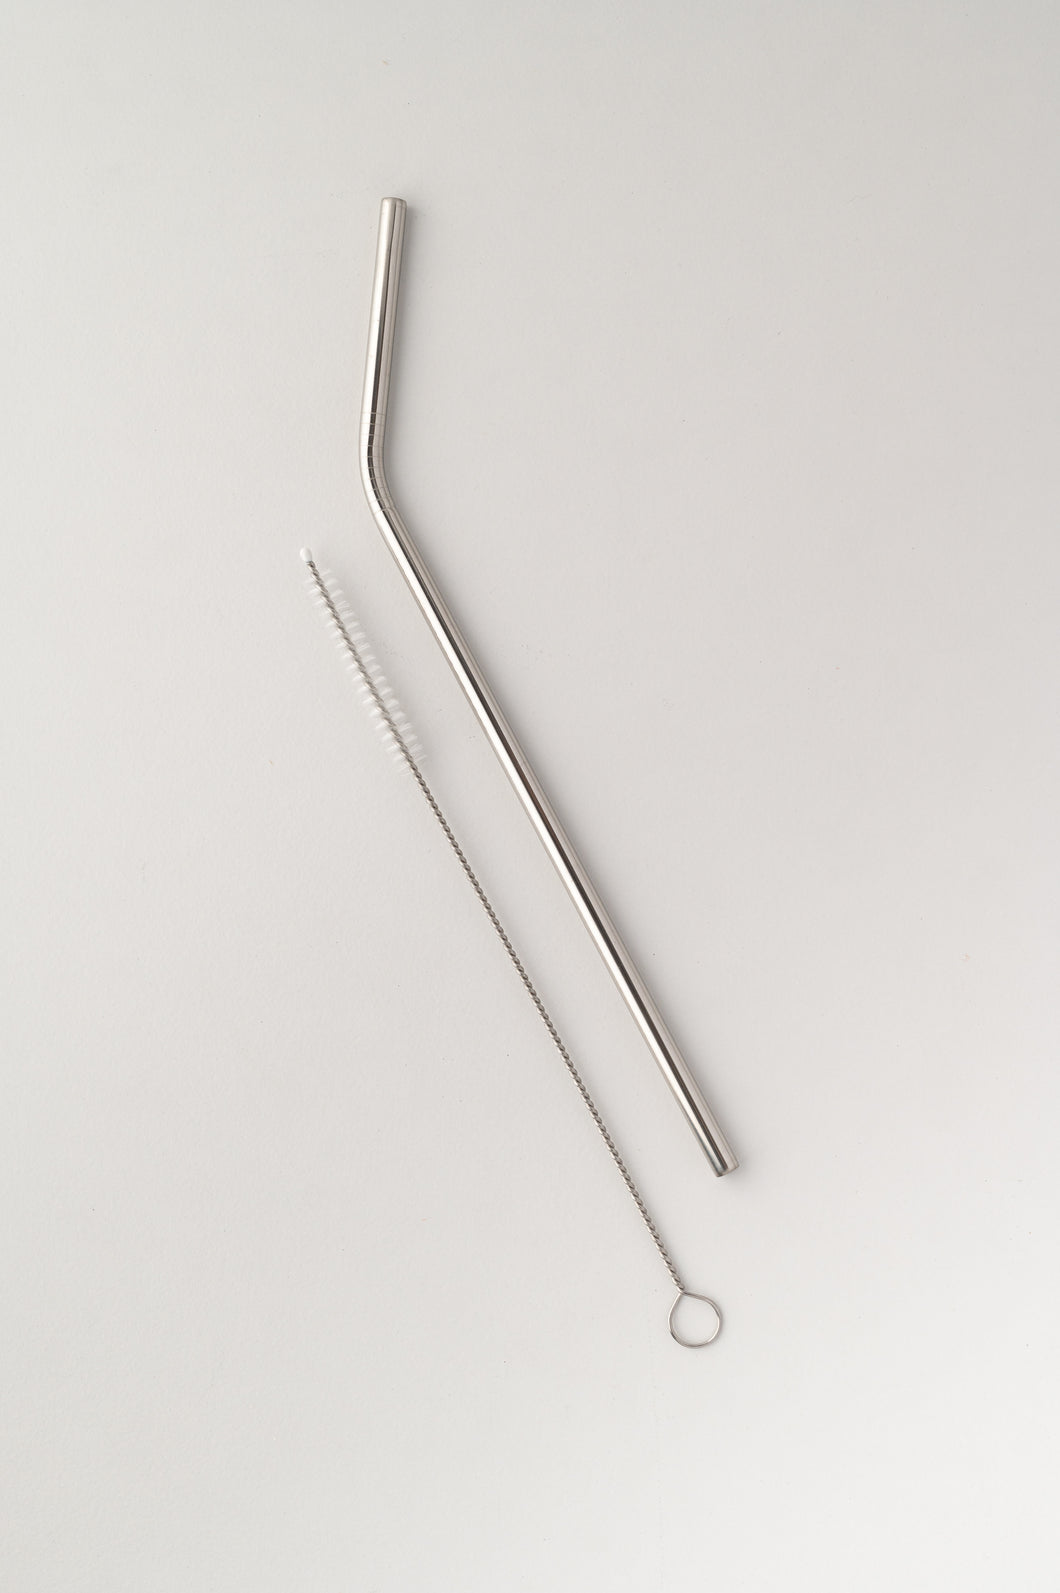 Bent Stainless Steel Straw (On Sale from P80 - P60!)